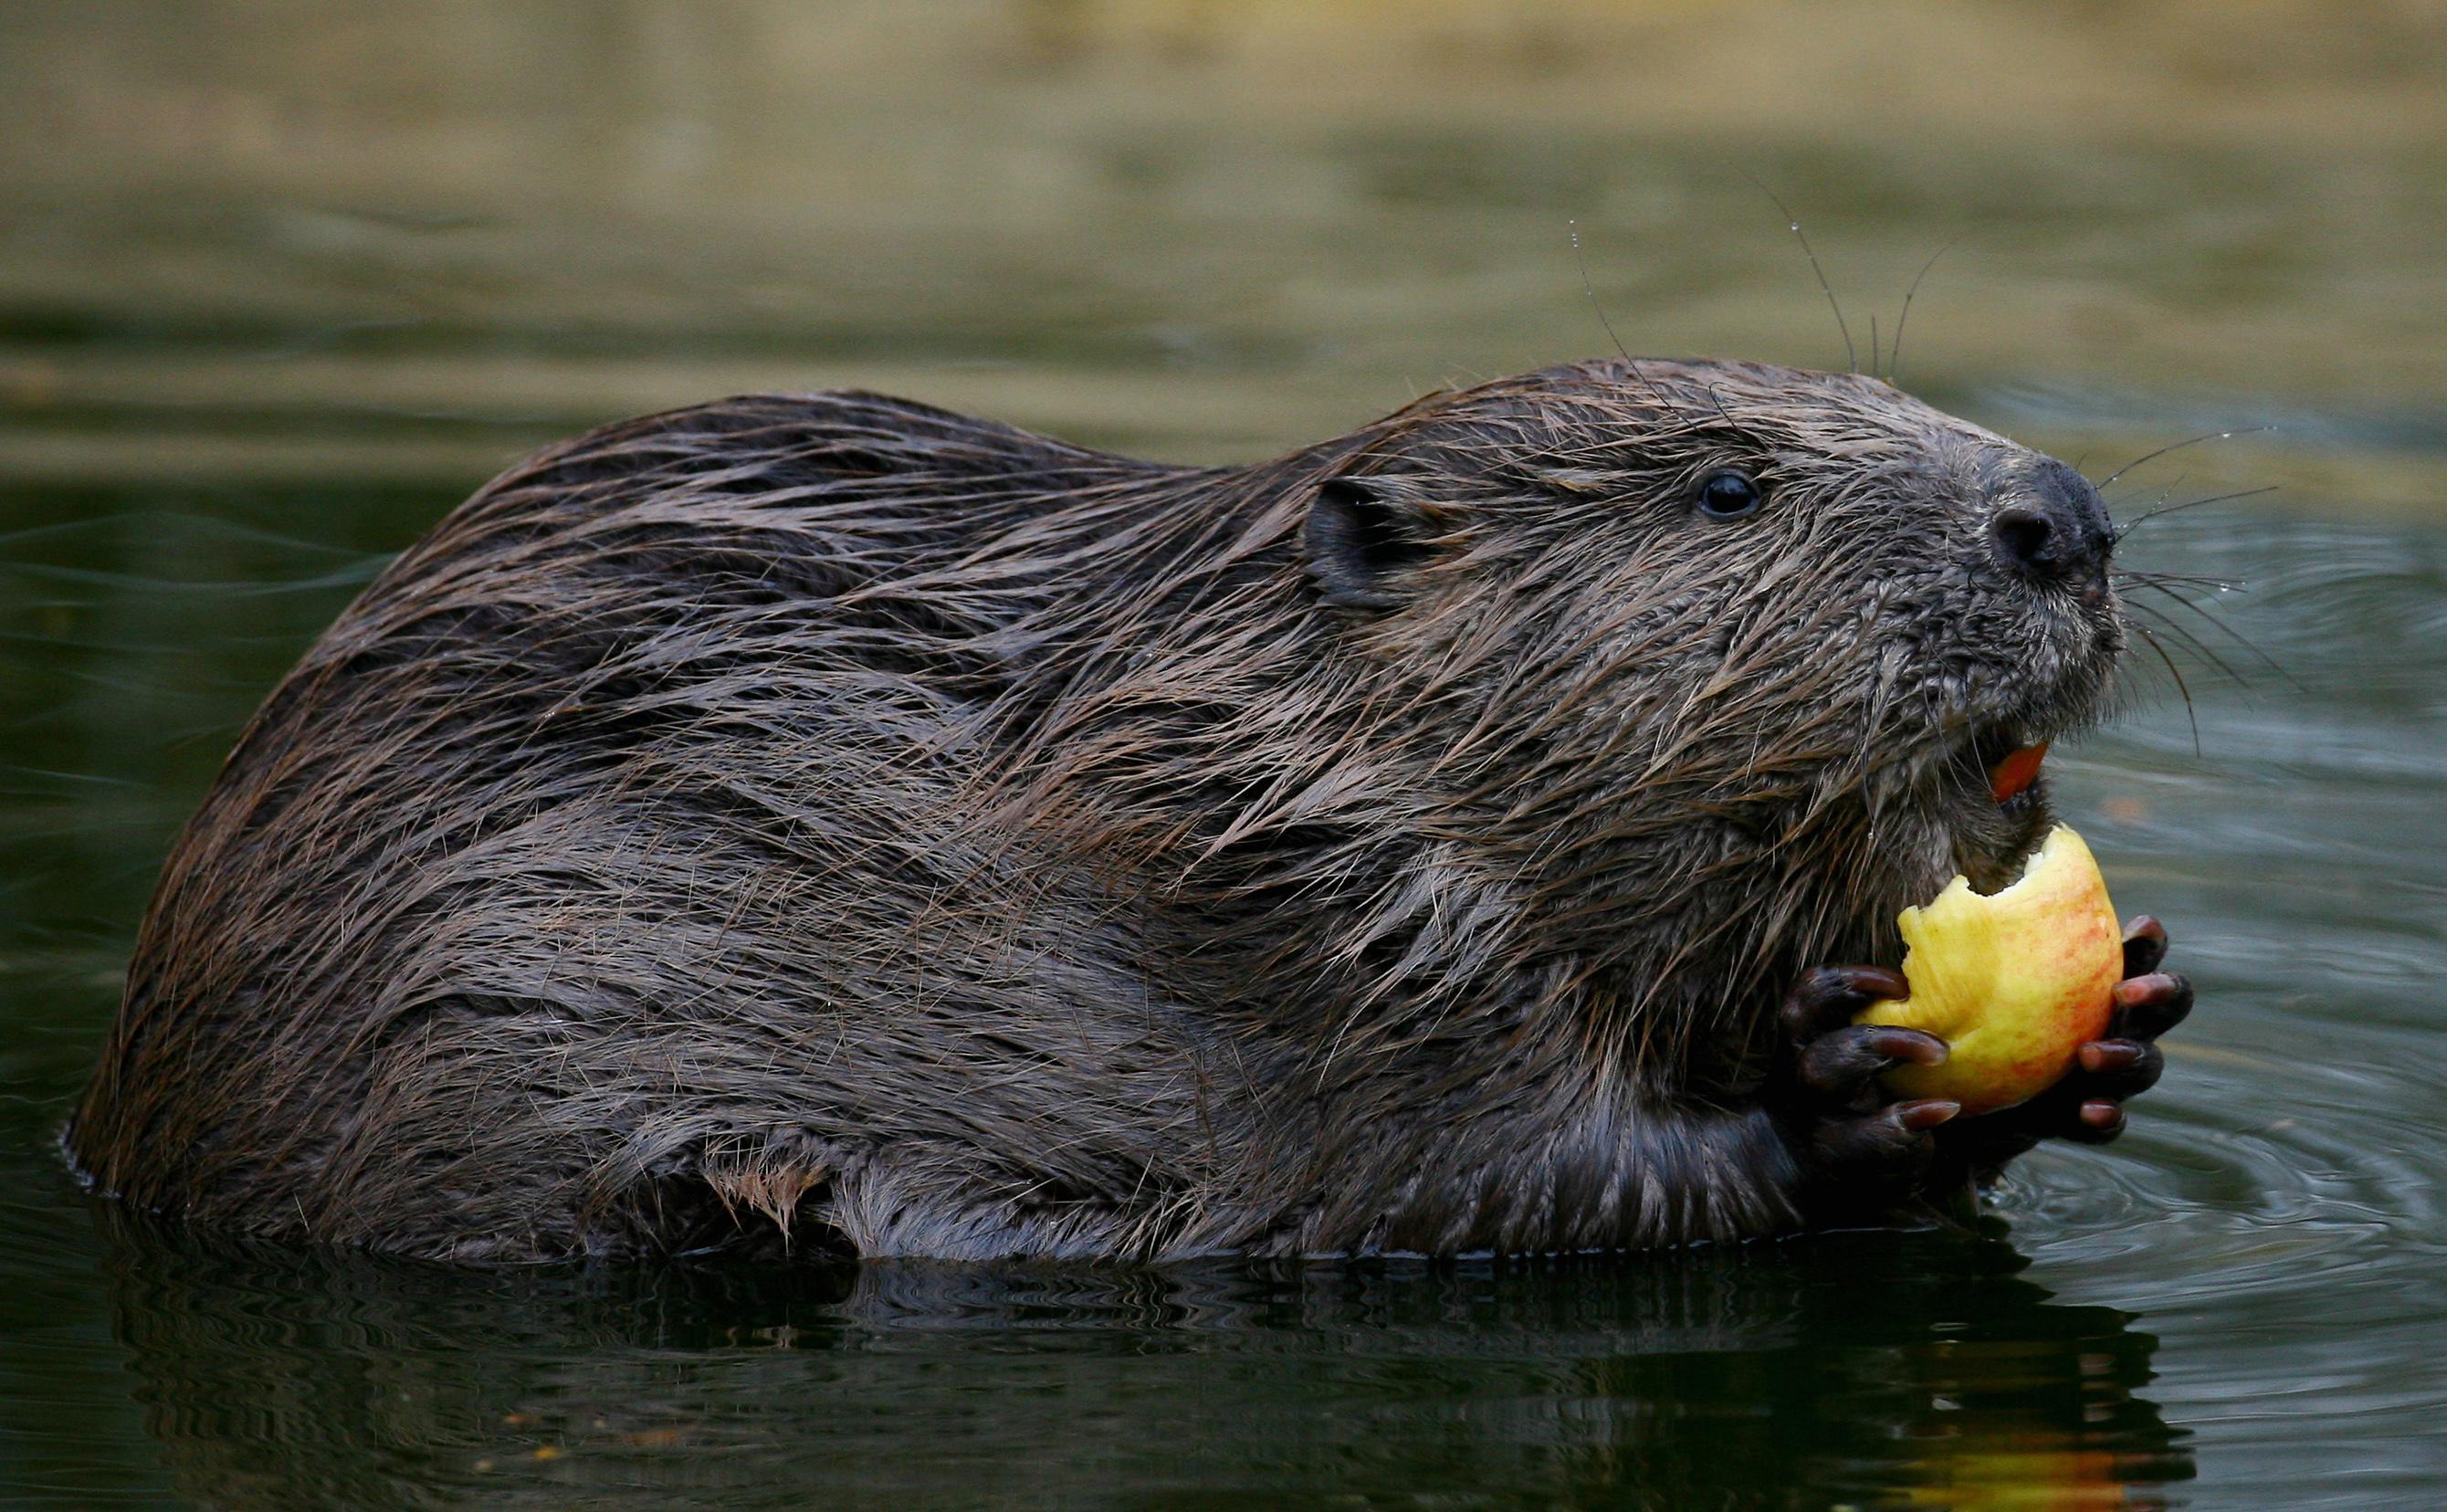 Beavers brought back to London for first time in 400 years to help restore natural habitats | ITV News London